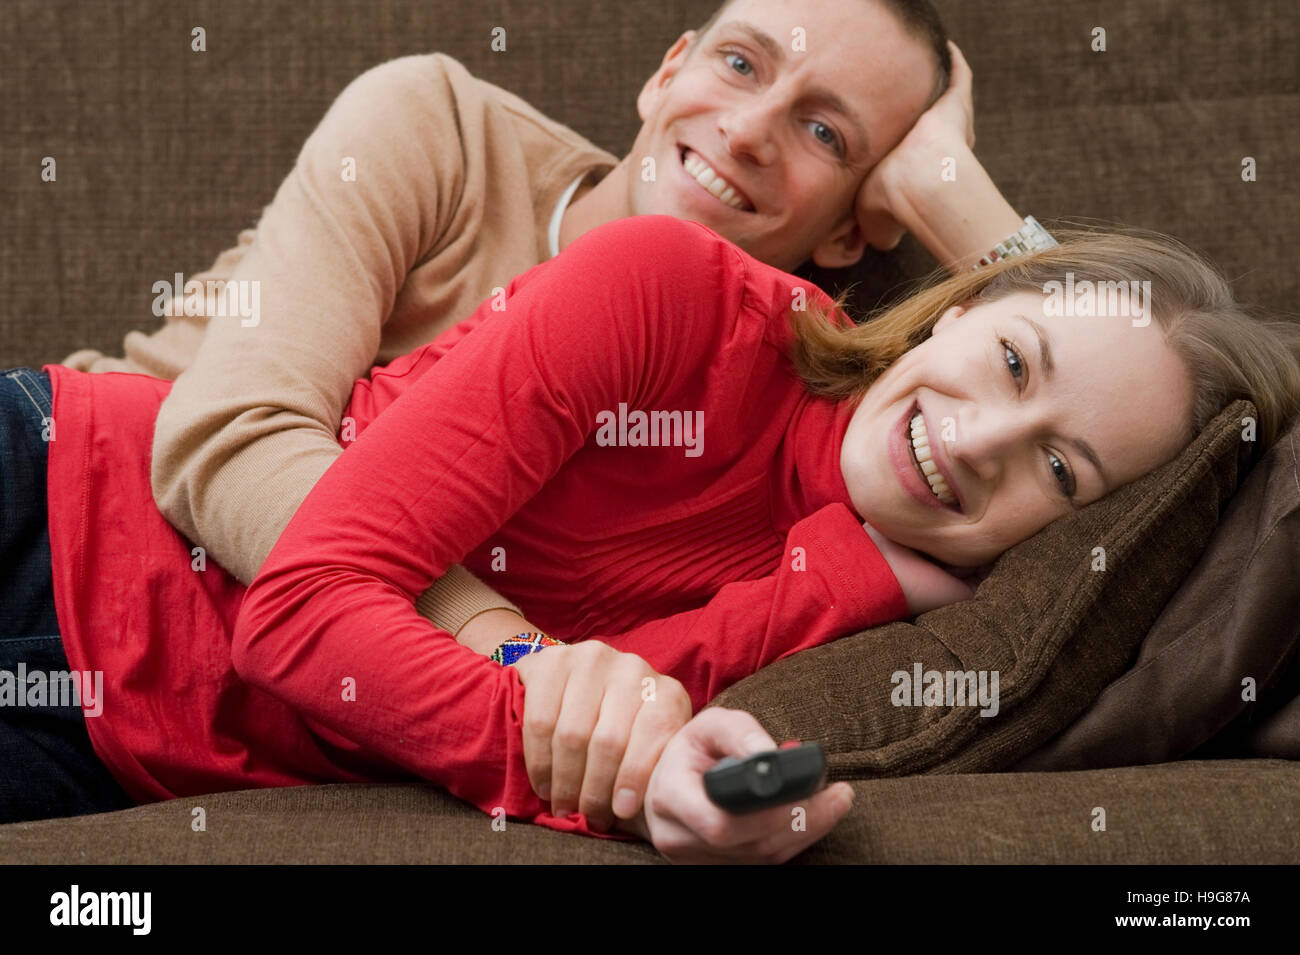 Couple lying on a couch watching TV Banque D'Images